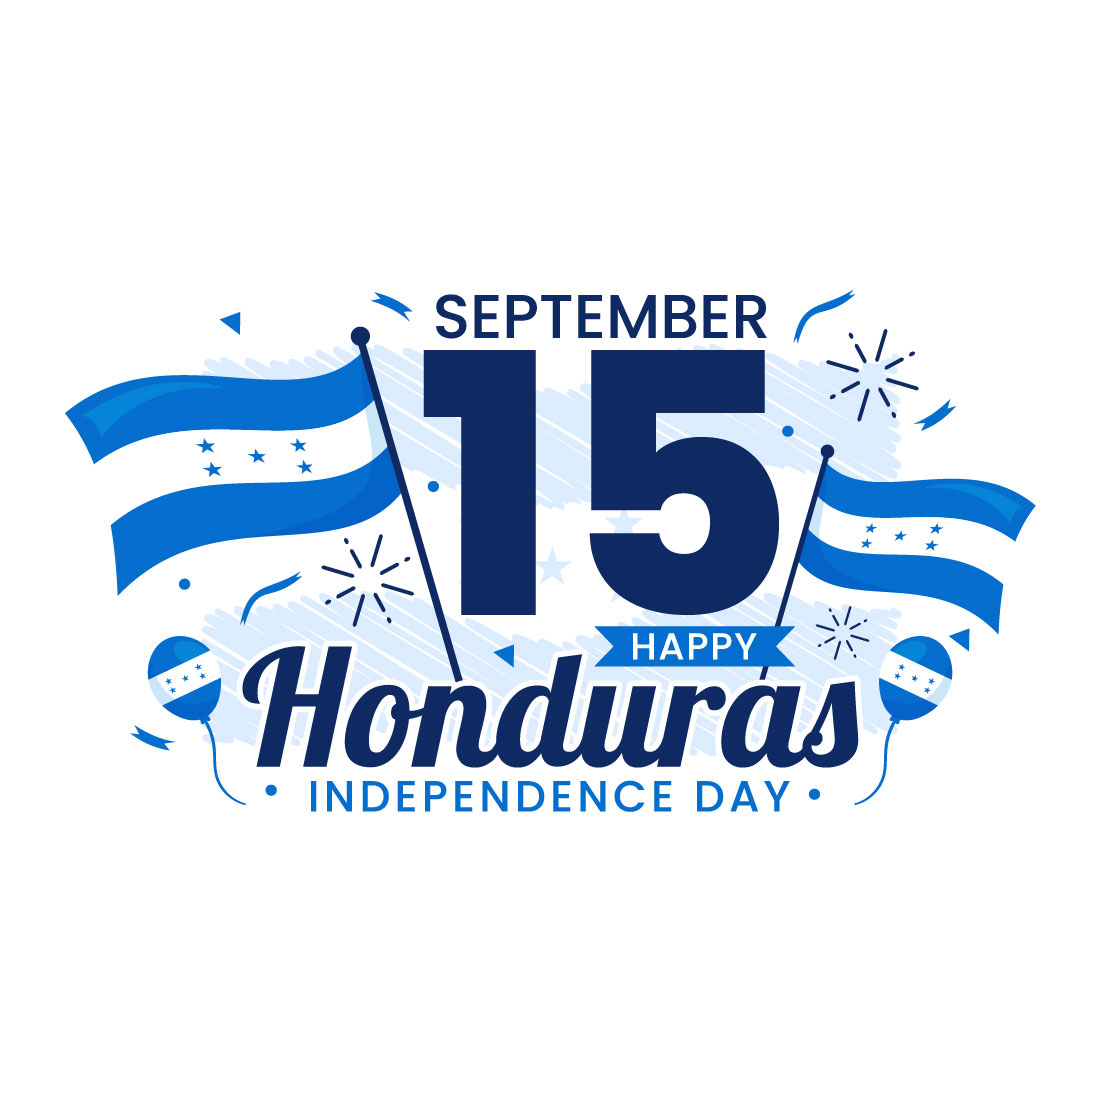 13 Honduras Independence Day Illustration preview image.